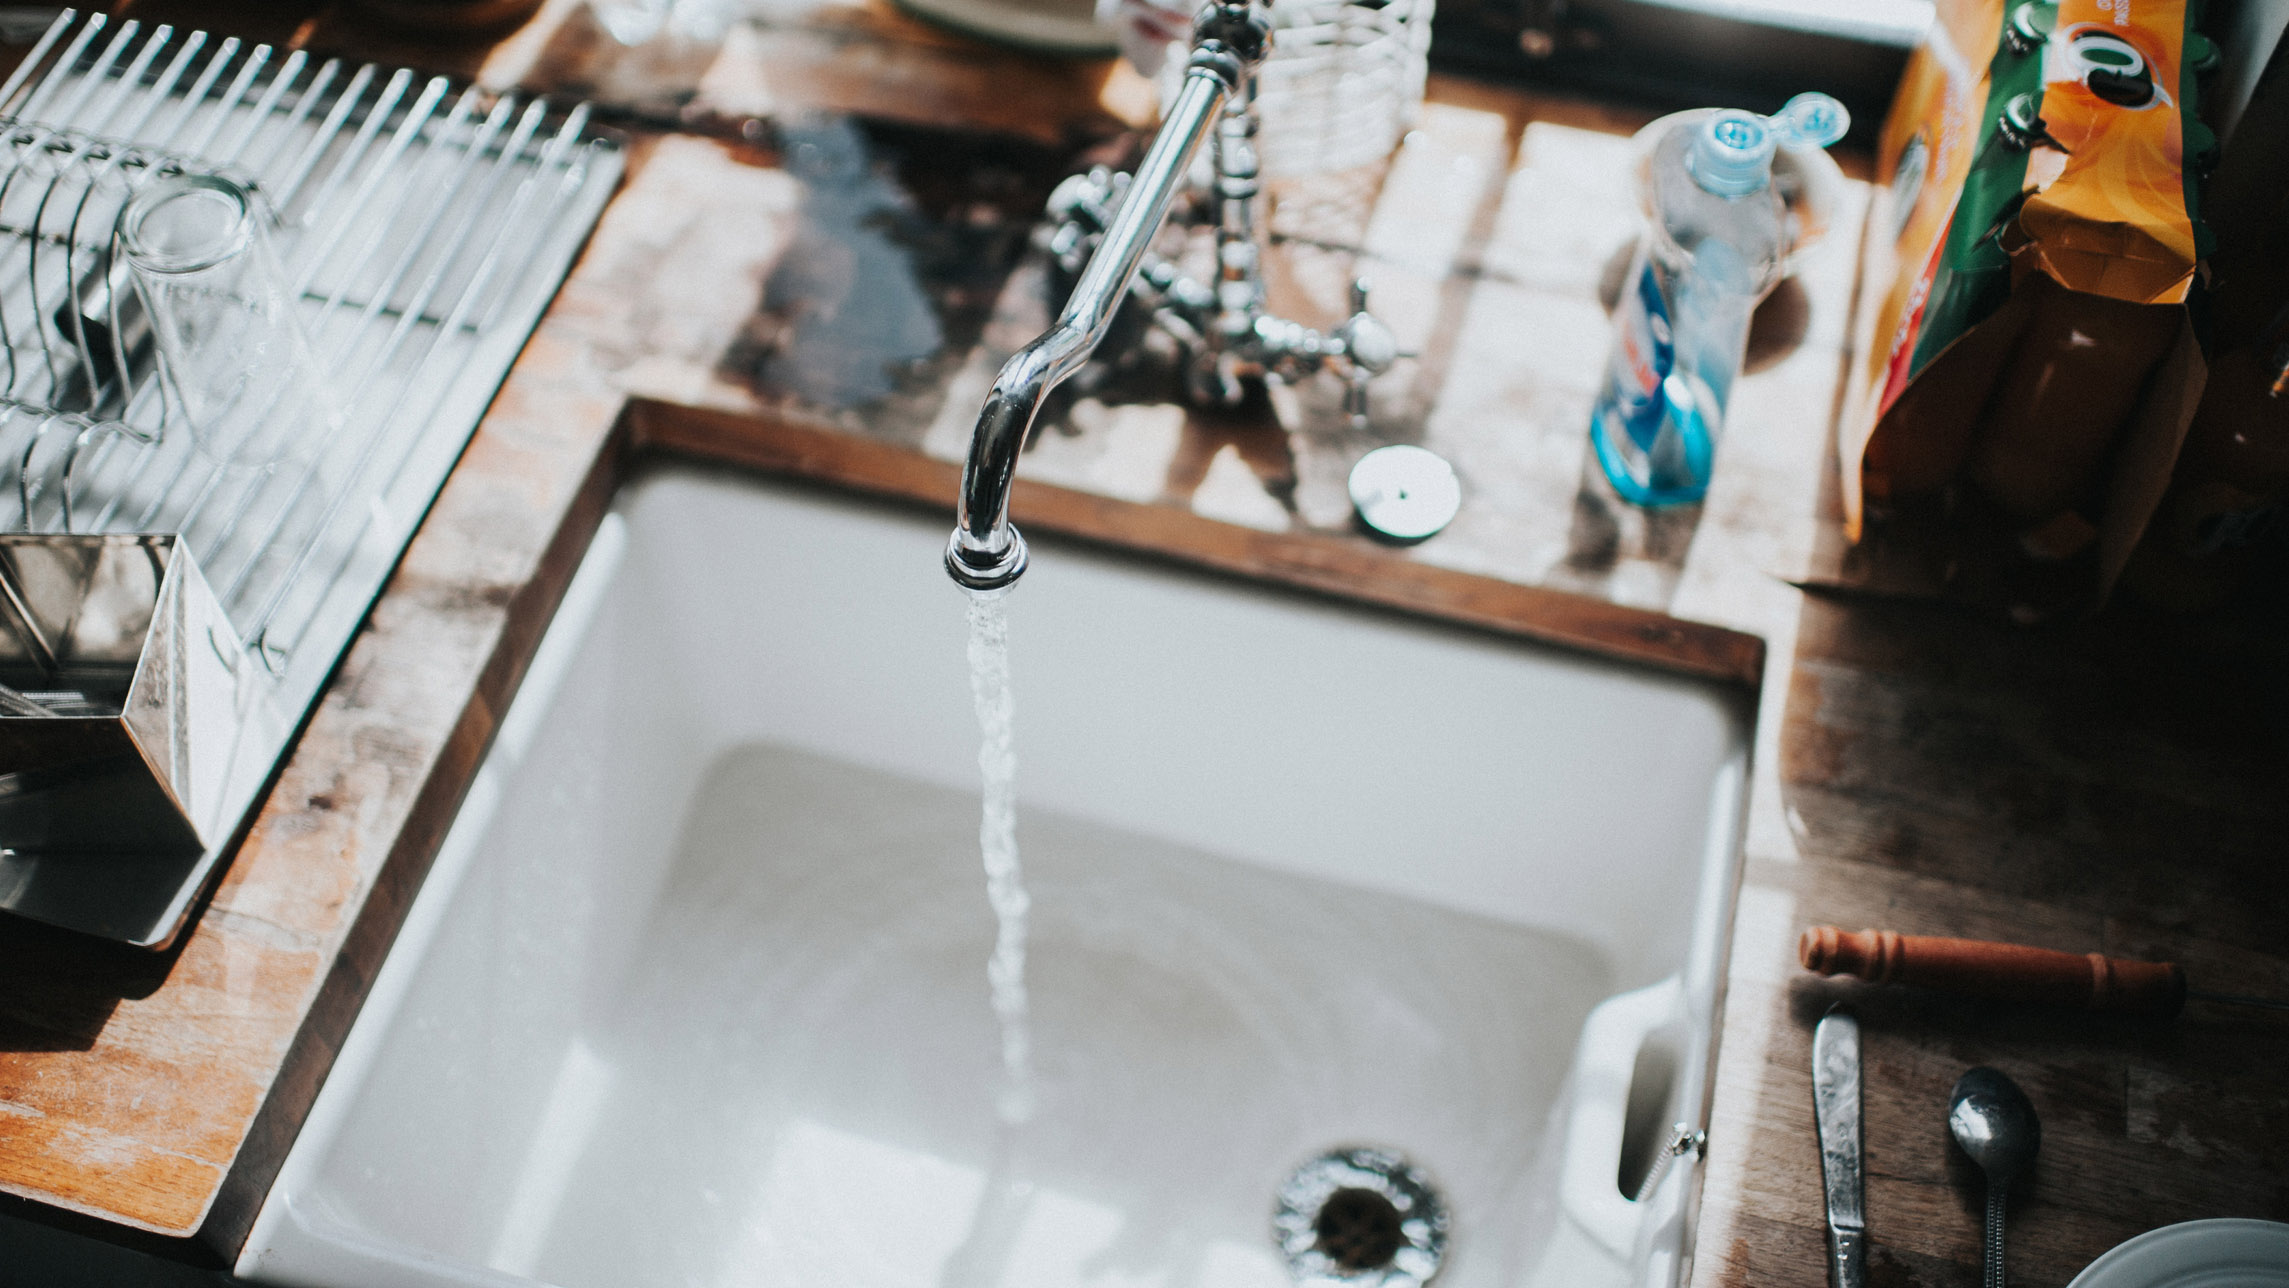 Kitchen Sink Not Clogged but Won't Drain? Try These Tips - My Trusted Expert